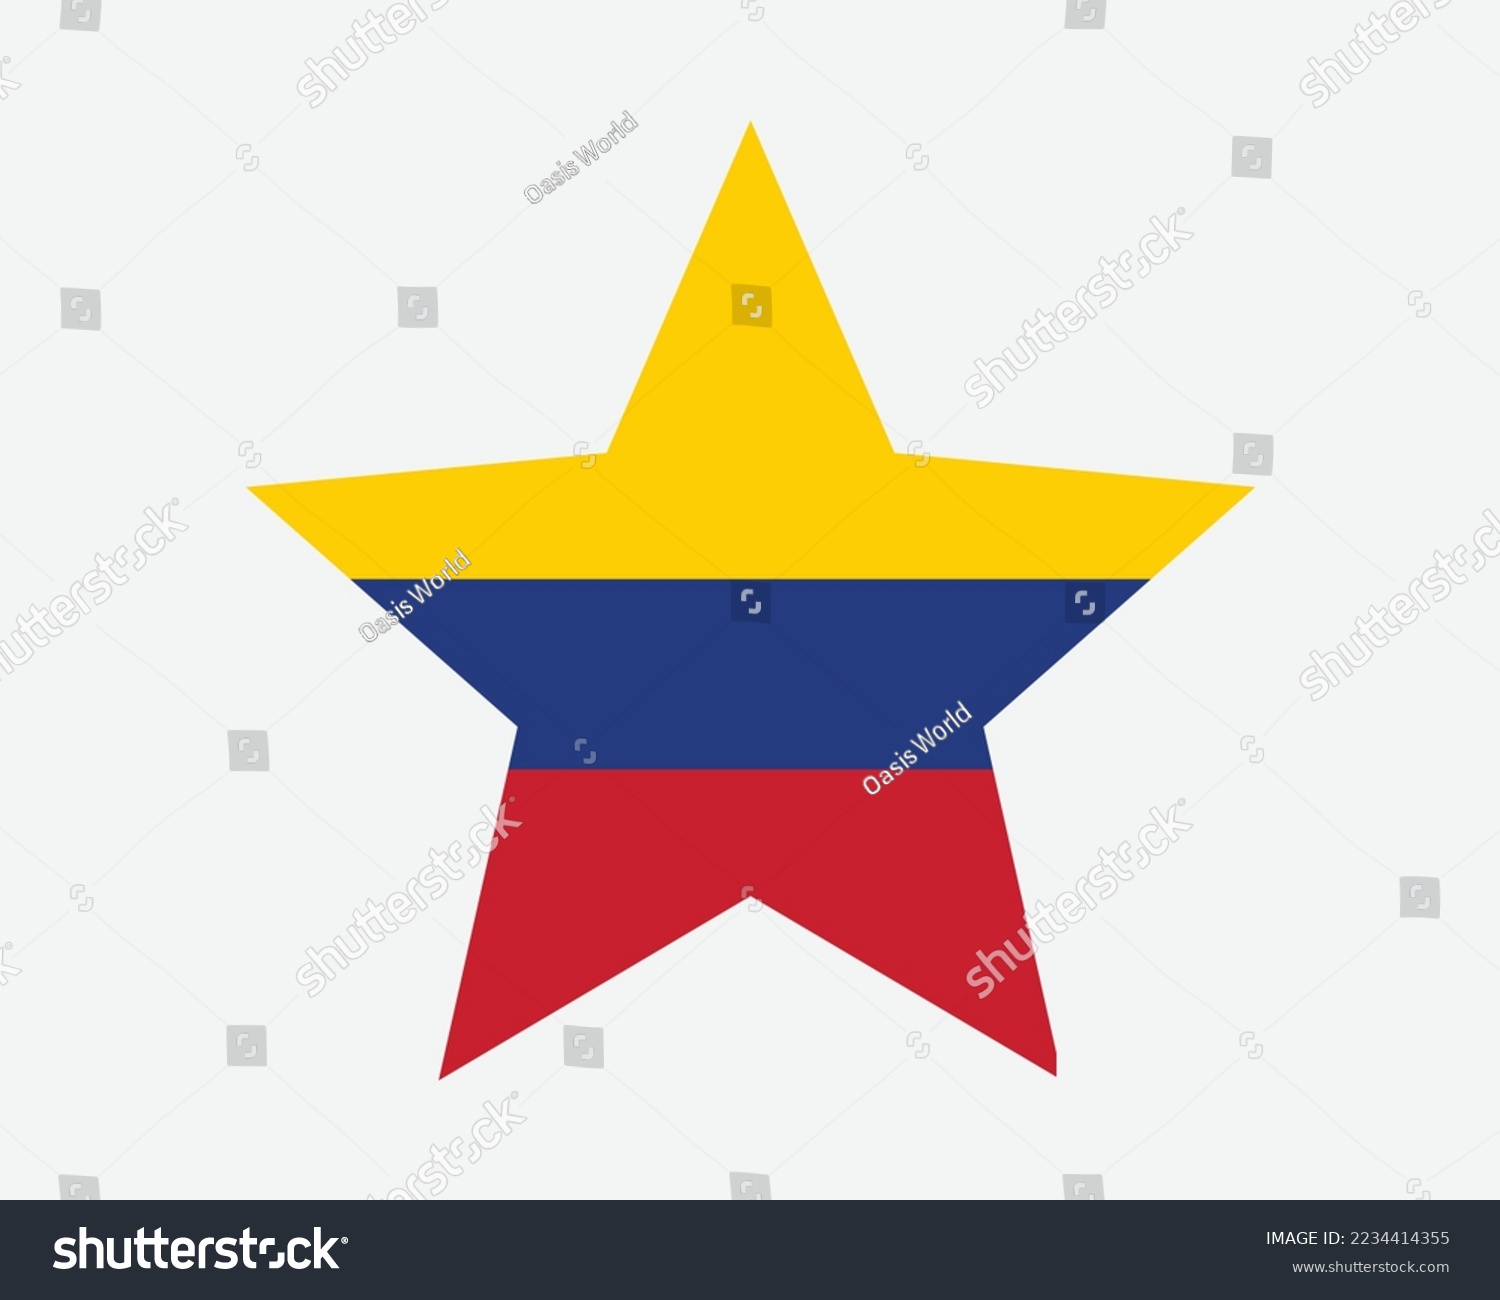 SVG of Colombia Star Flag. Colombian Star Shape Flag. Country National Banner Icon Symbol Vector 2D Flat Artwork Graphic Illustration svg